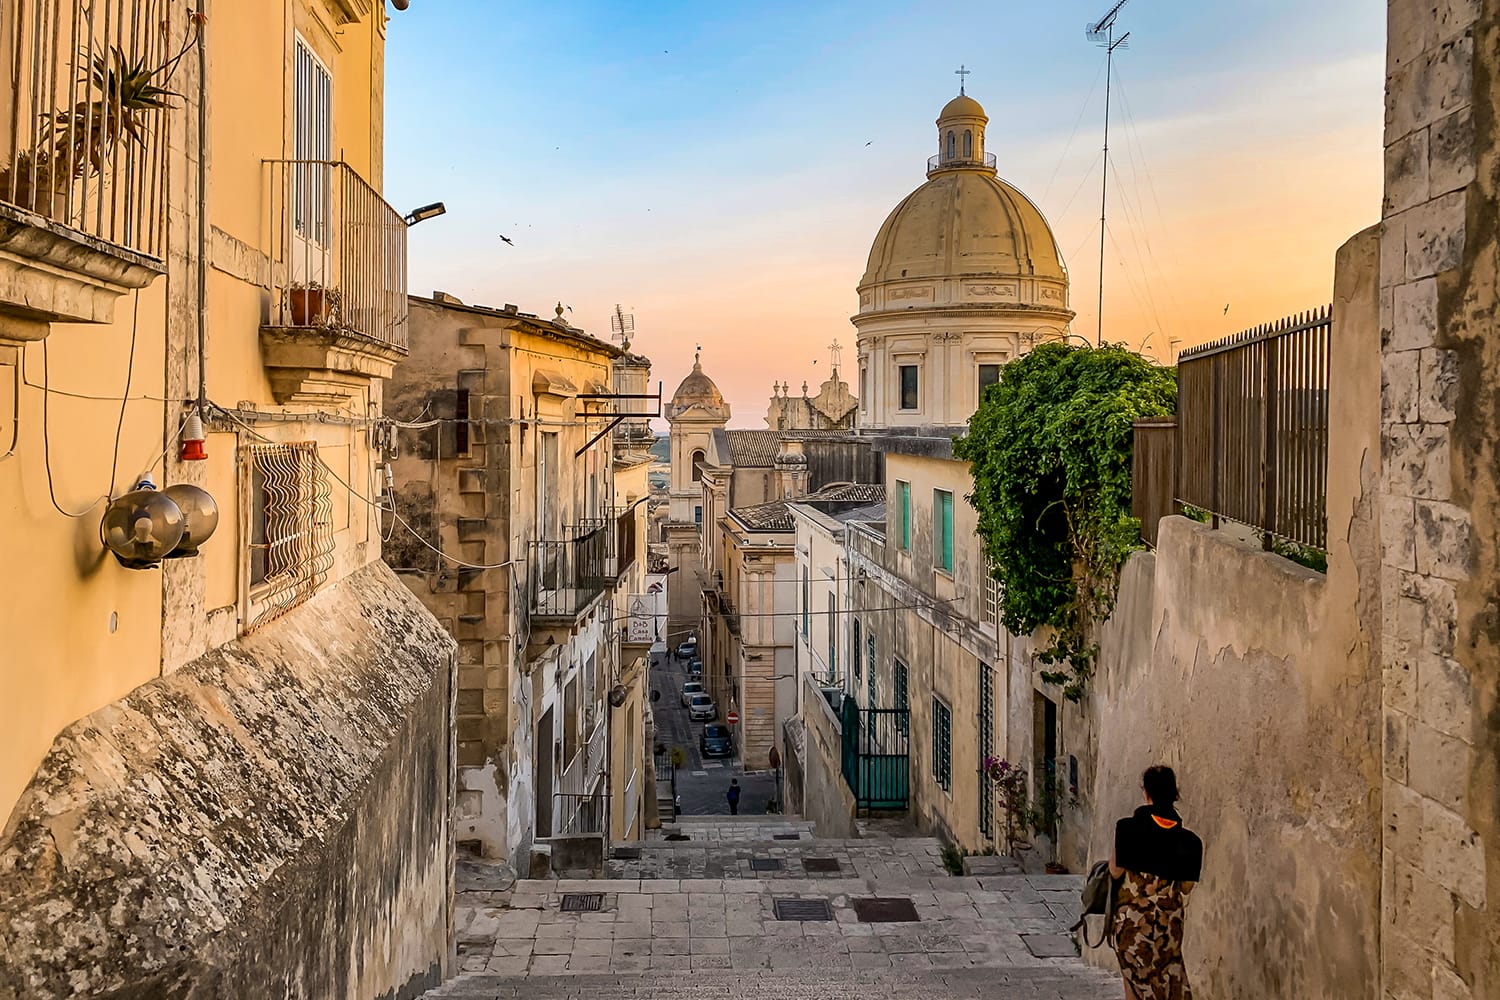 View of beautiful and typical streets and stairs in the baroque town of Noto in the province of Syracuse in Sicily, Italy